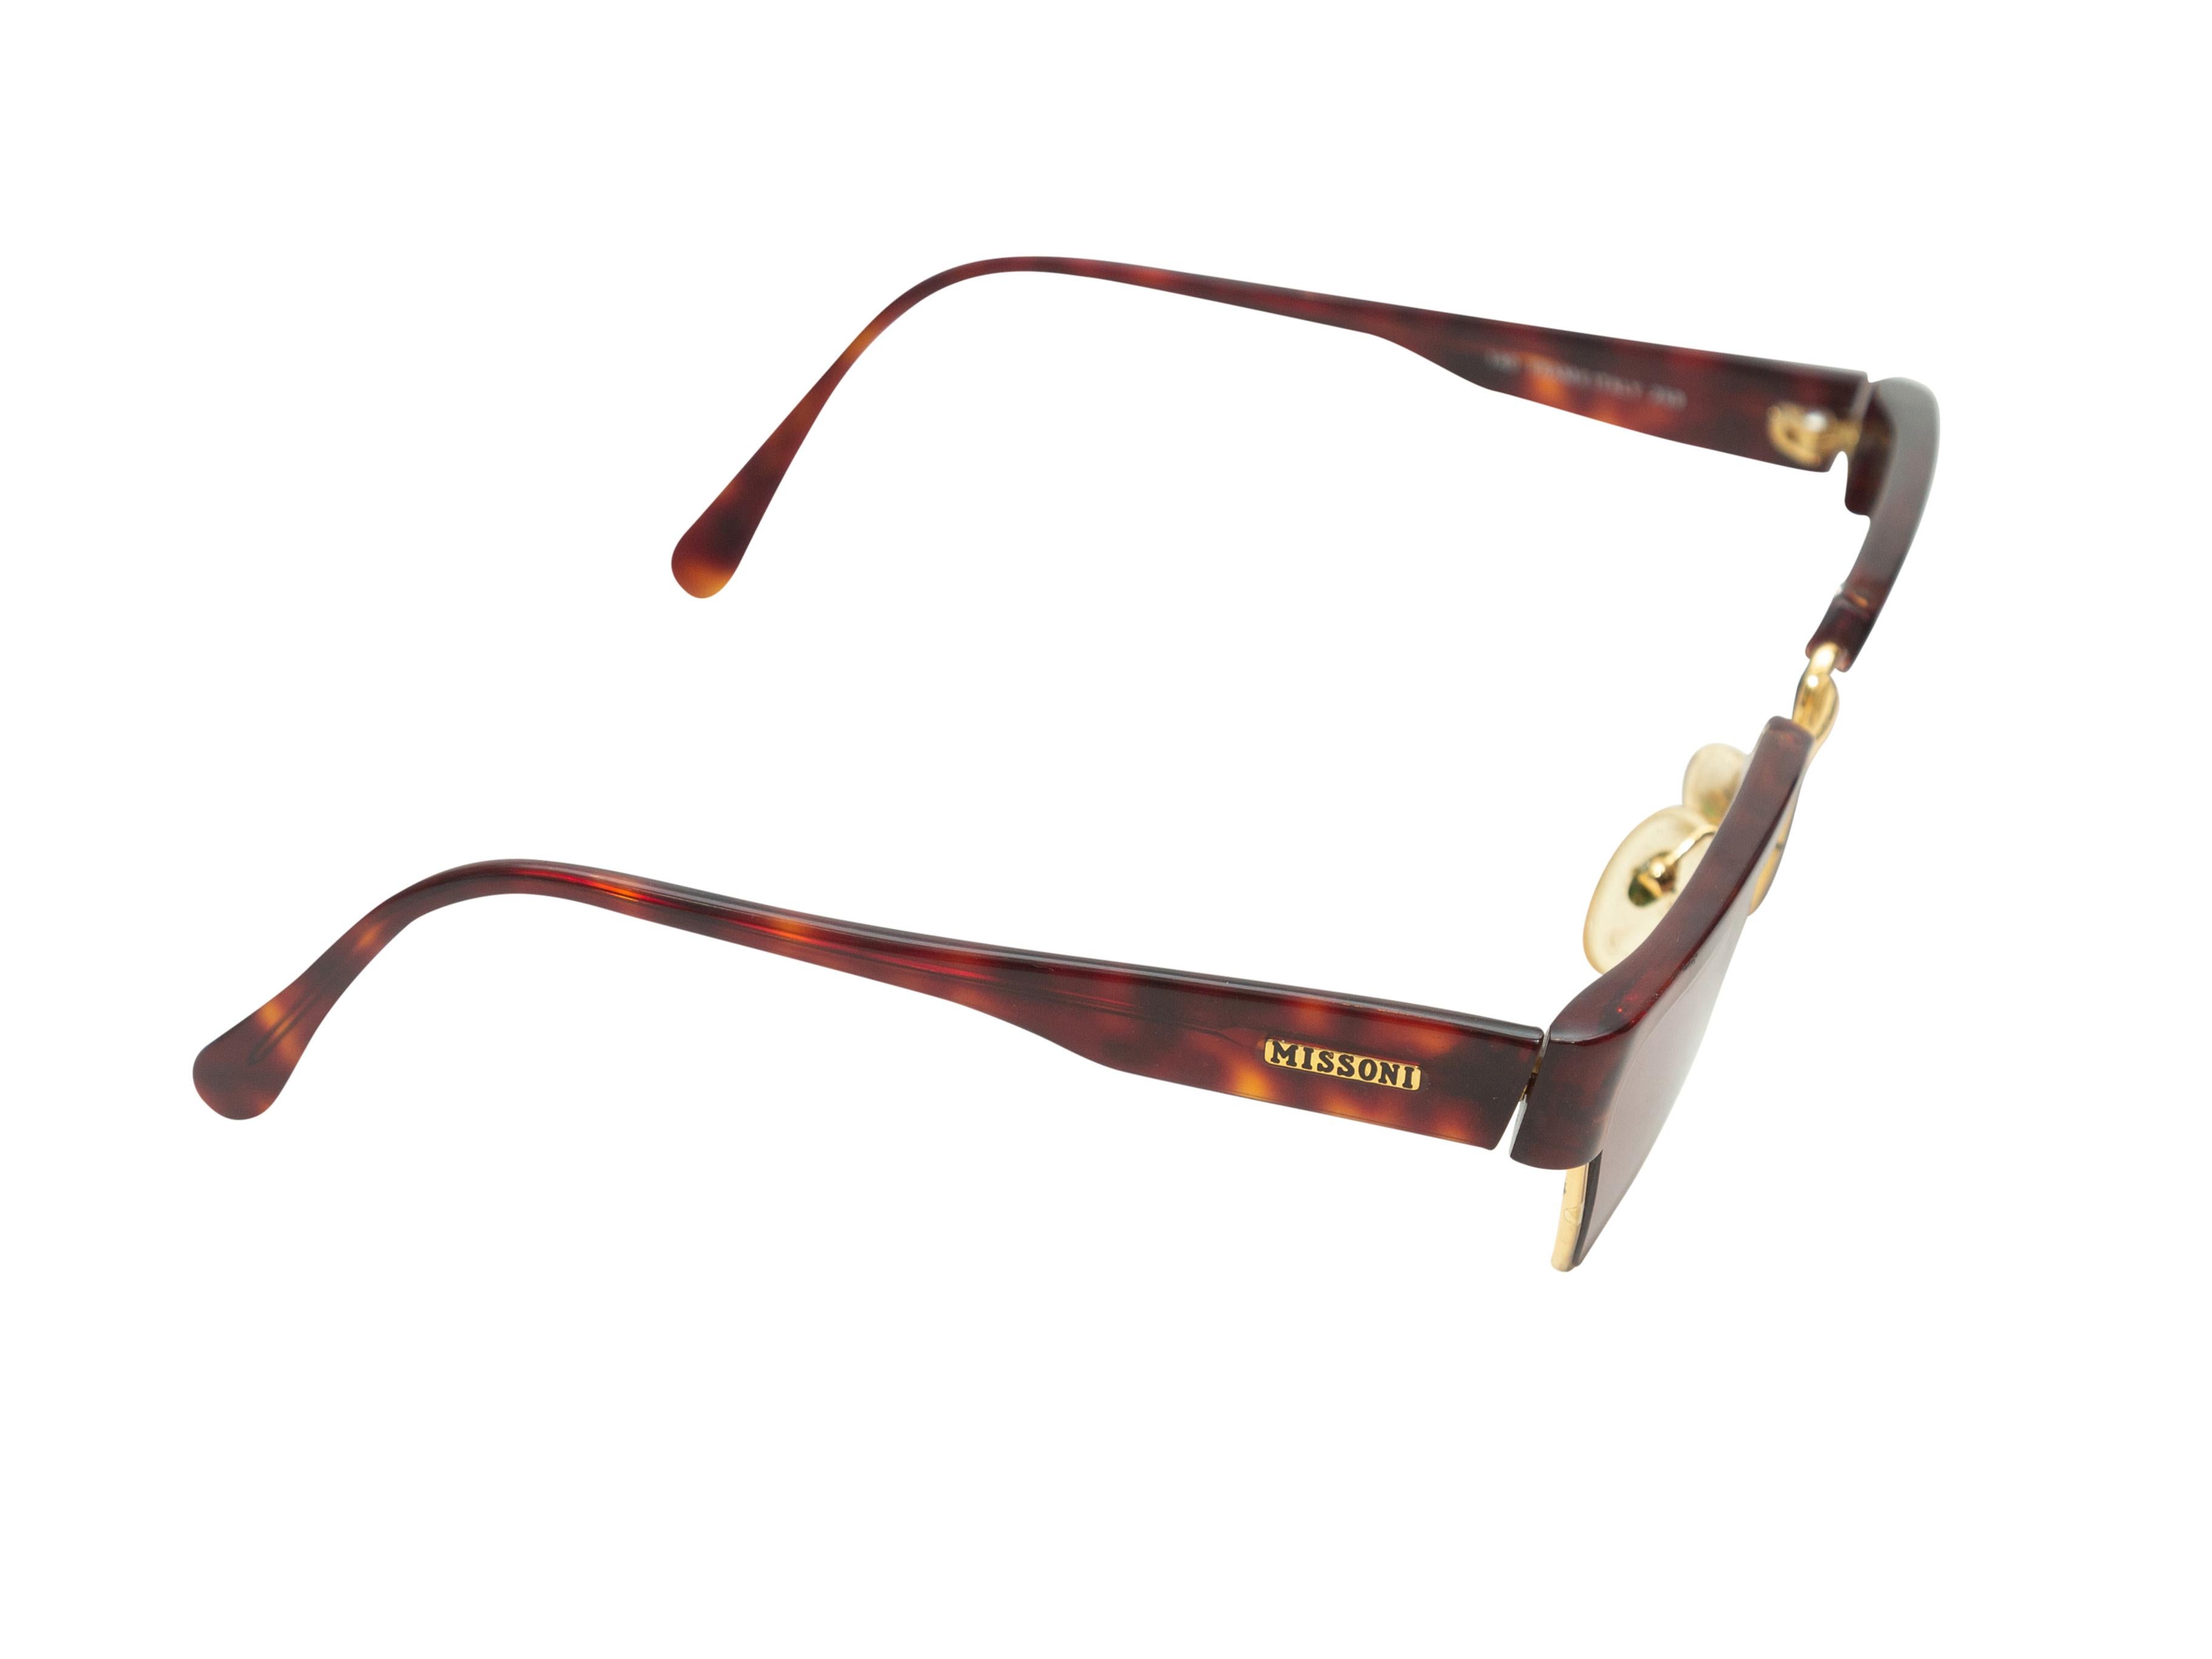 Product Details: Vintage brown tortoiseshell and gold-tone metal prescription sunglasses by Missoni. Brown tinted lenses.
Condition: Pre-owned. Good. Minor scratches at lenses.
